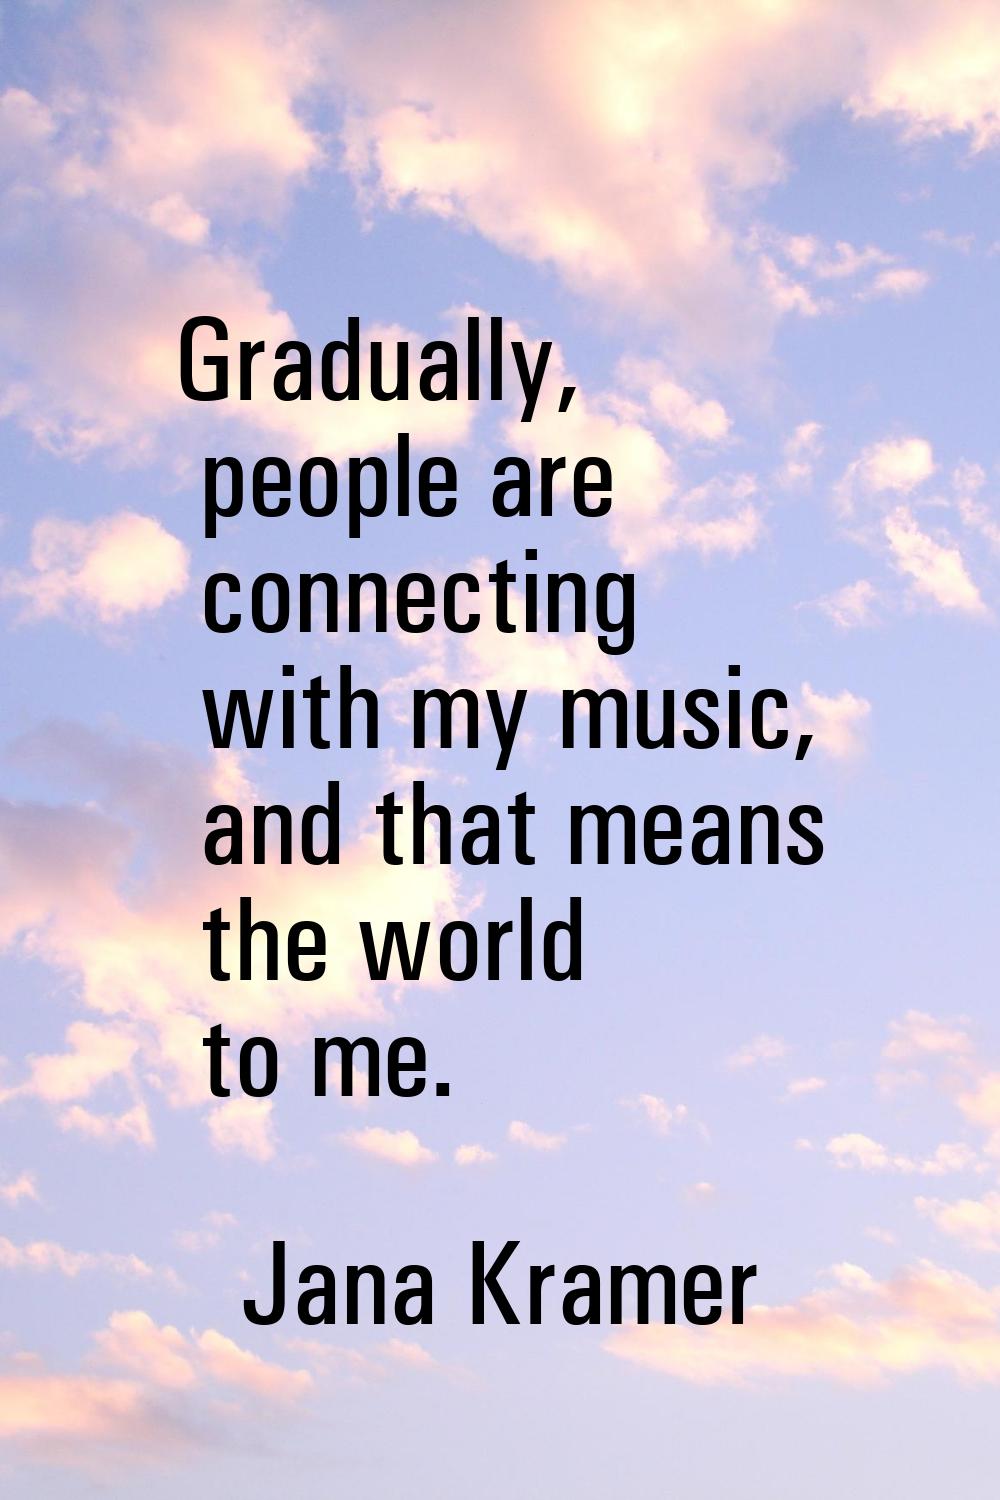 Gradually, people are connecting with my music, and that means the world to me.